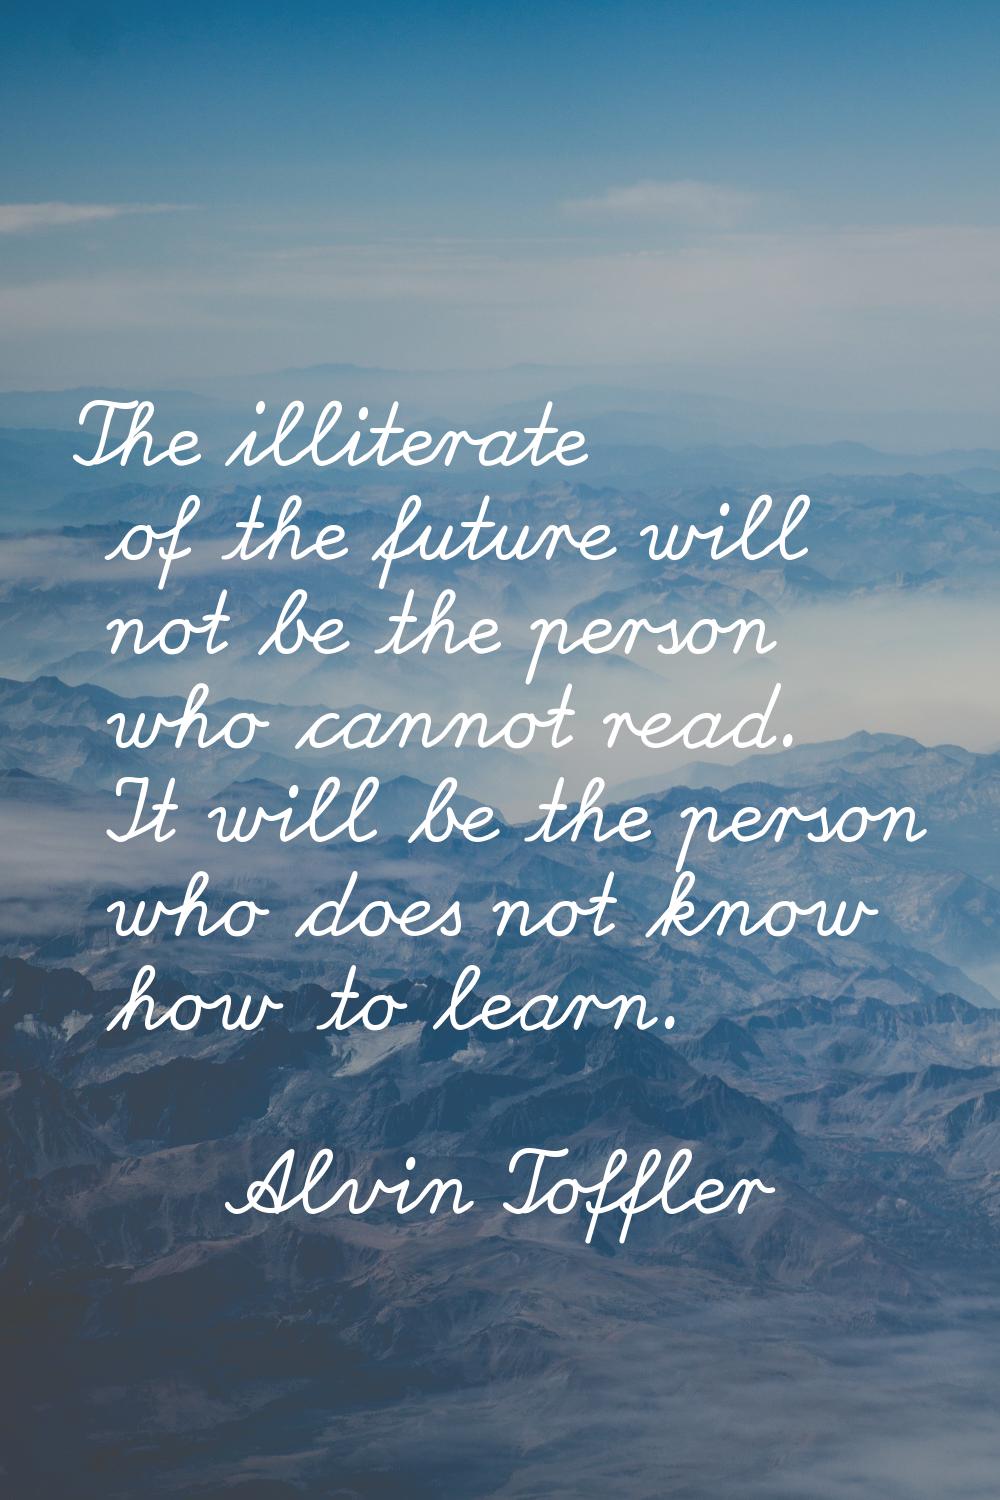 The illiterate of the future will not be the person who cannot read. It will be the person who does